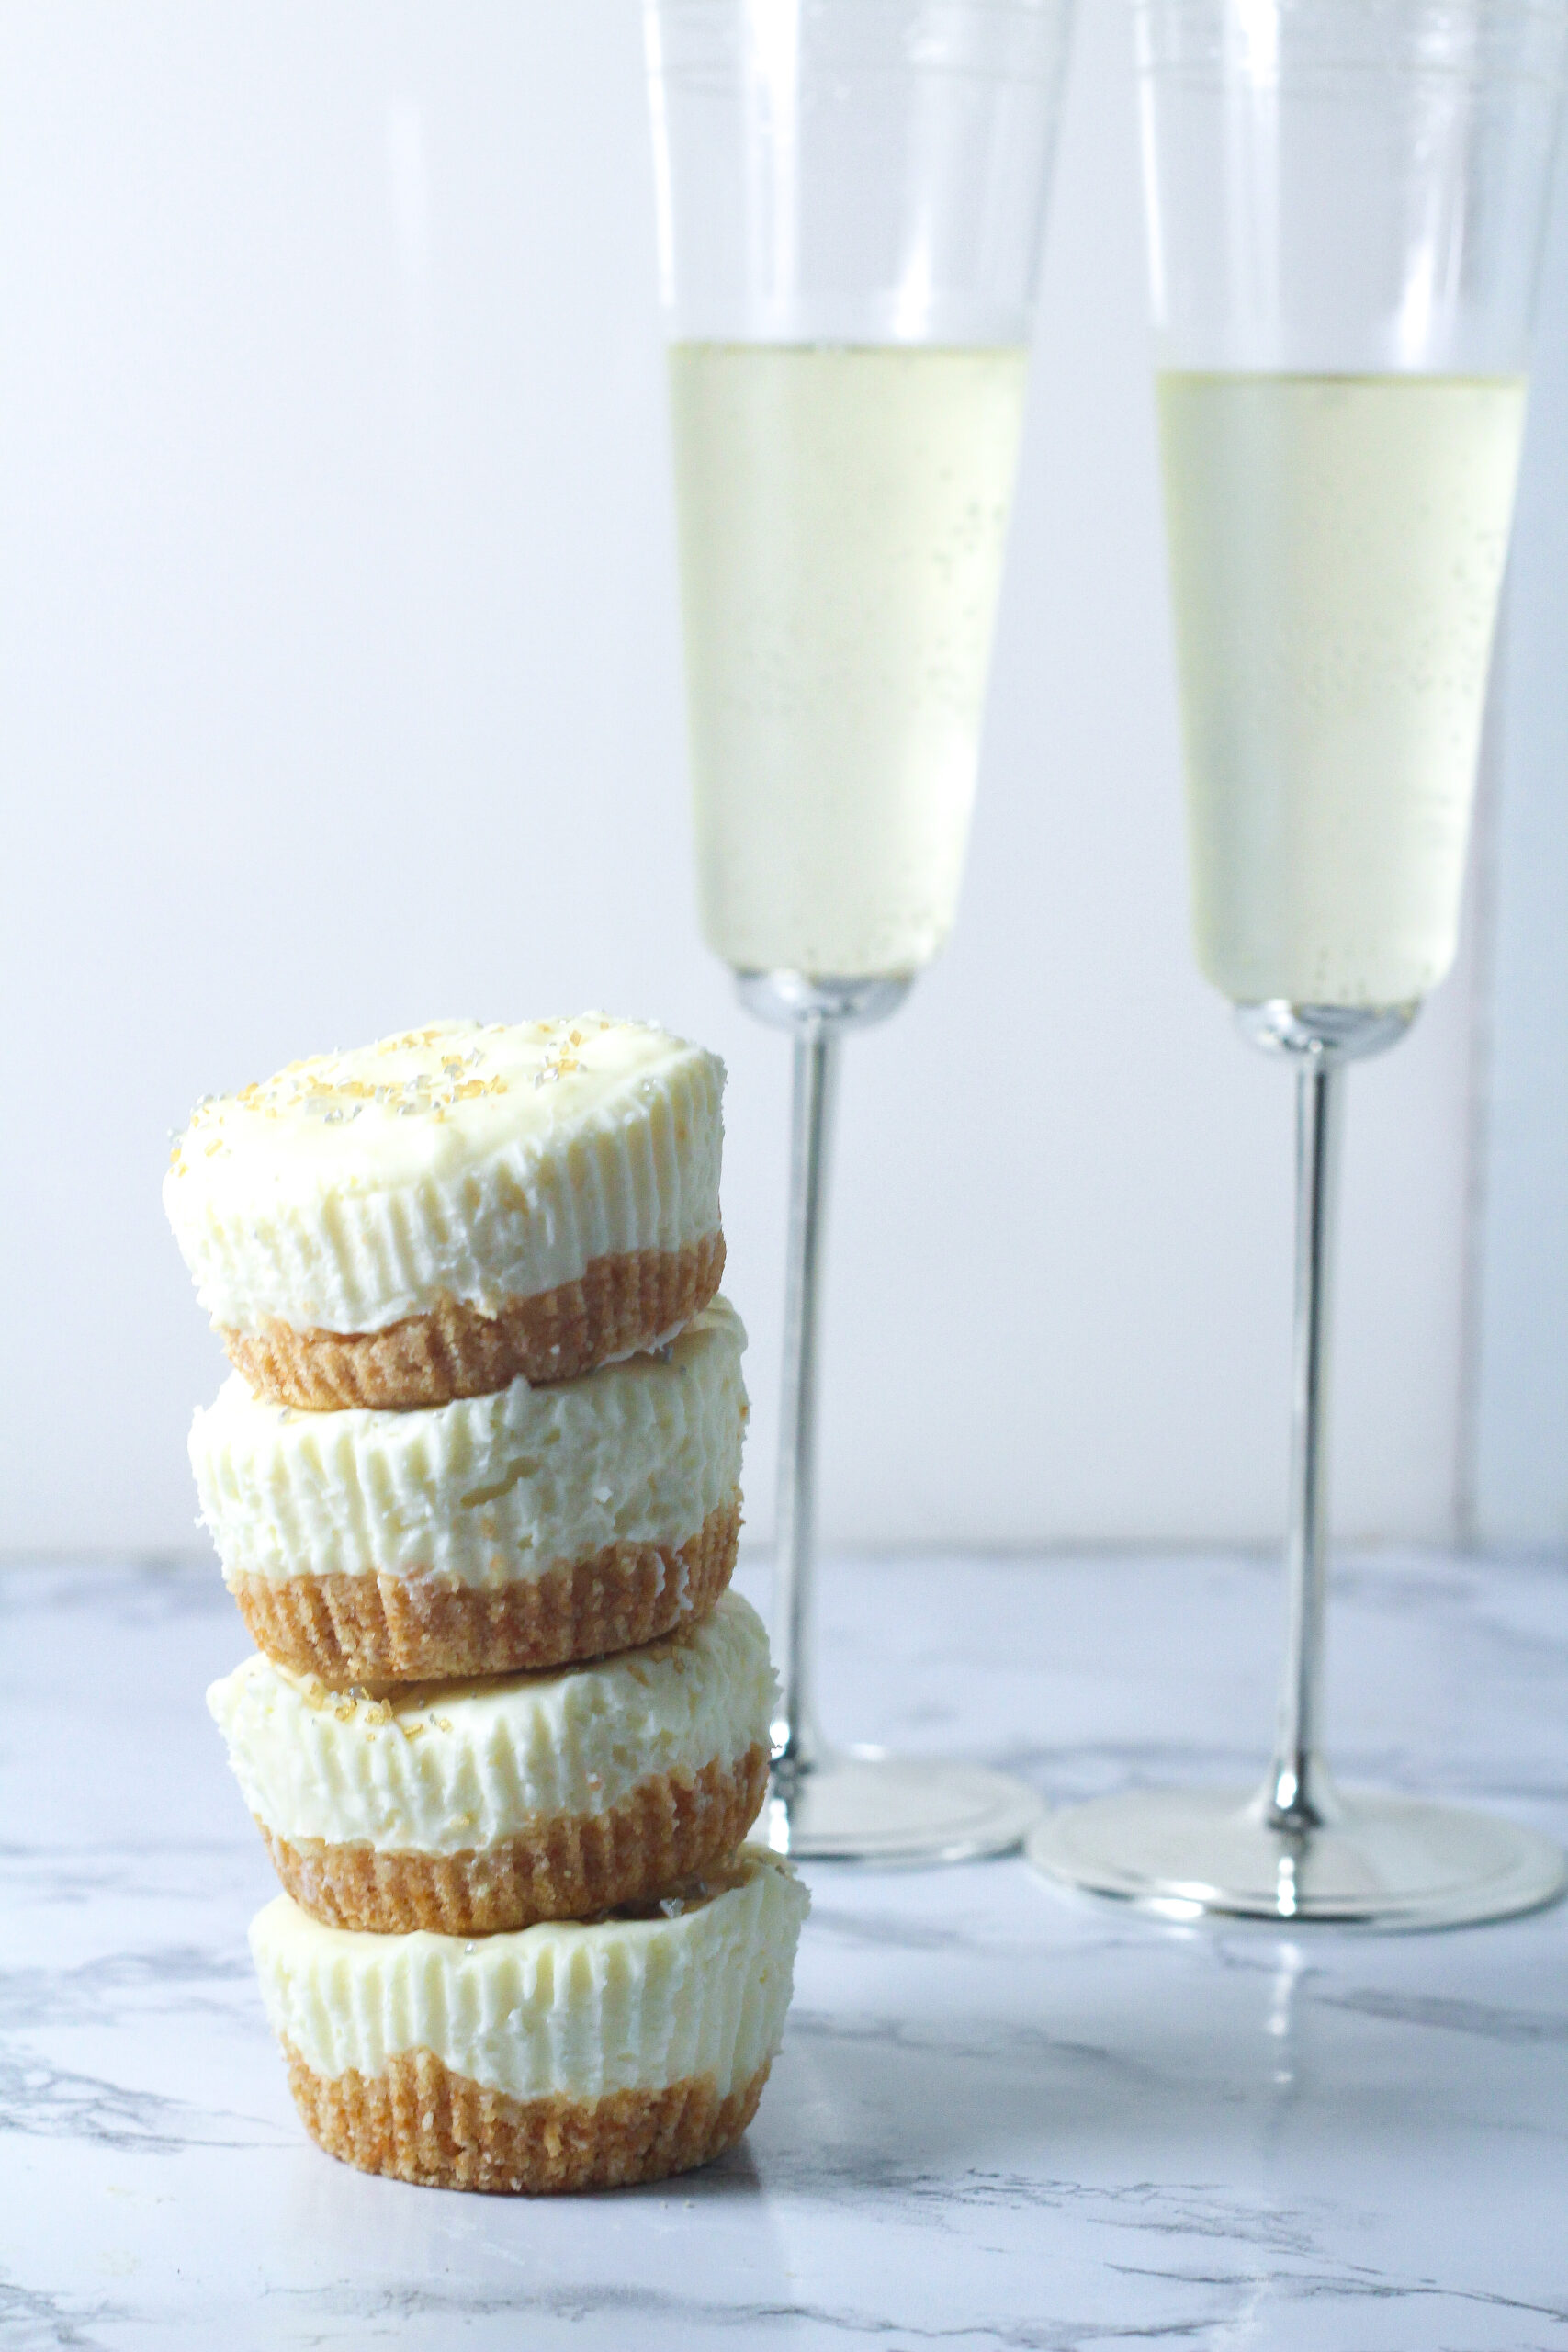 stack of 4 prosecco cheesecakes to the front left of two flutes of champagne on a marbled surface